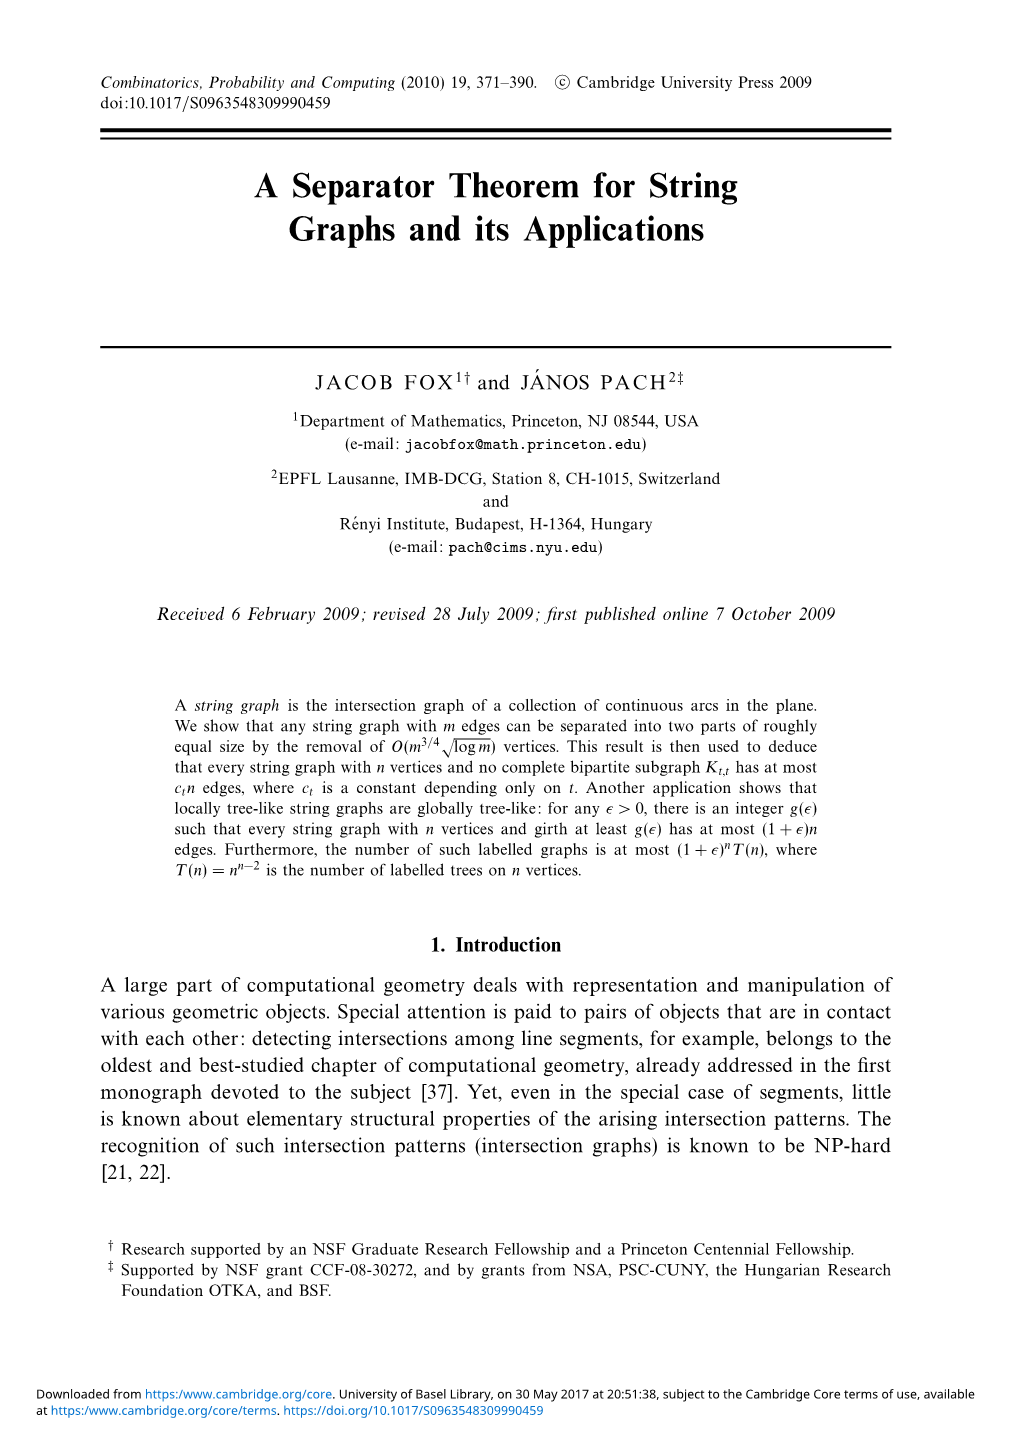 A Separator Theorem for String Graphs and Its Applications